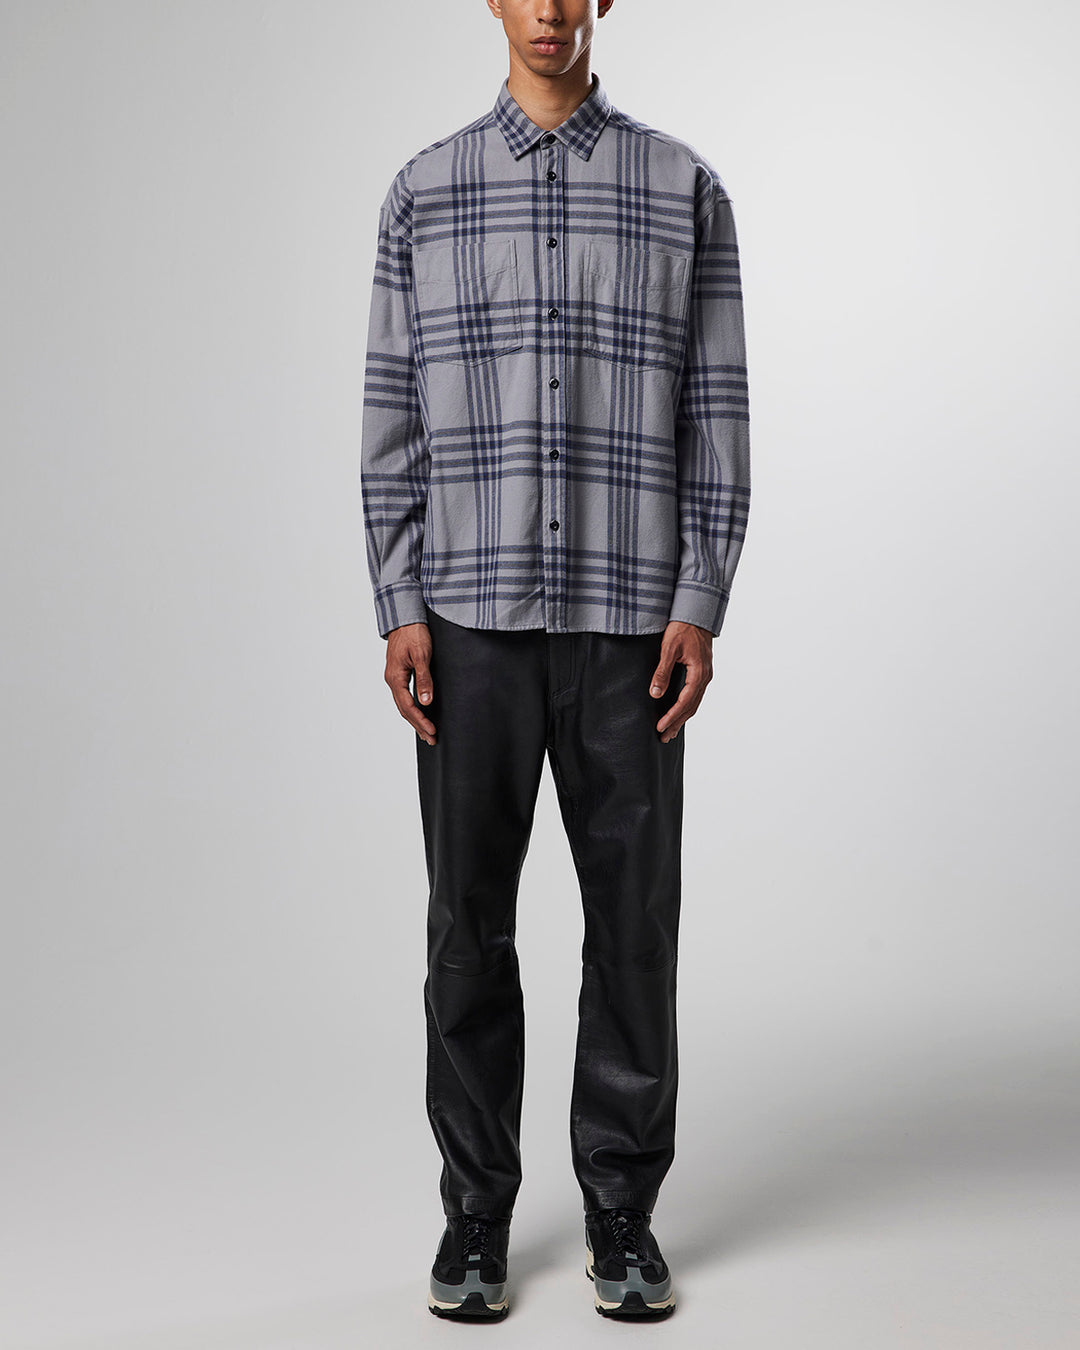 NN07 - Deon Western 5219 Shirt in Grey Check | Buster McGee